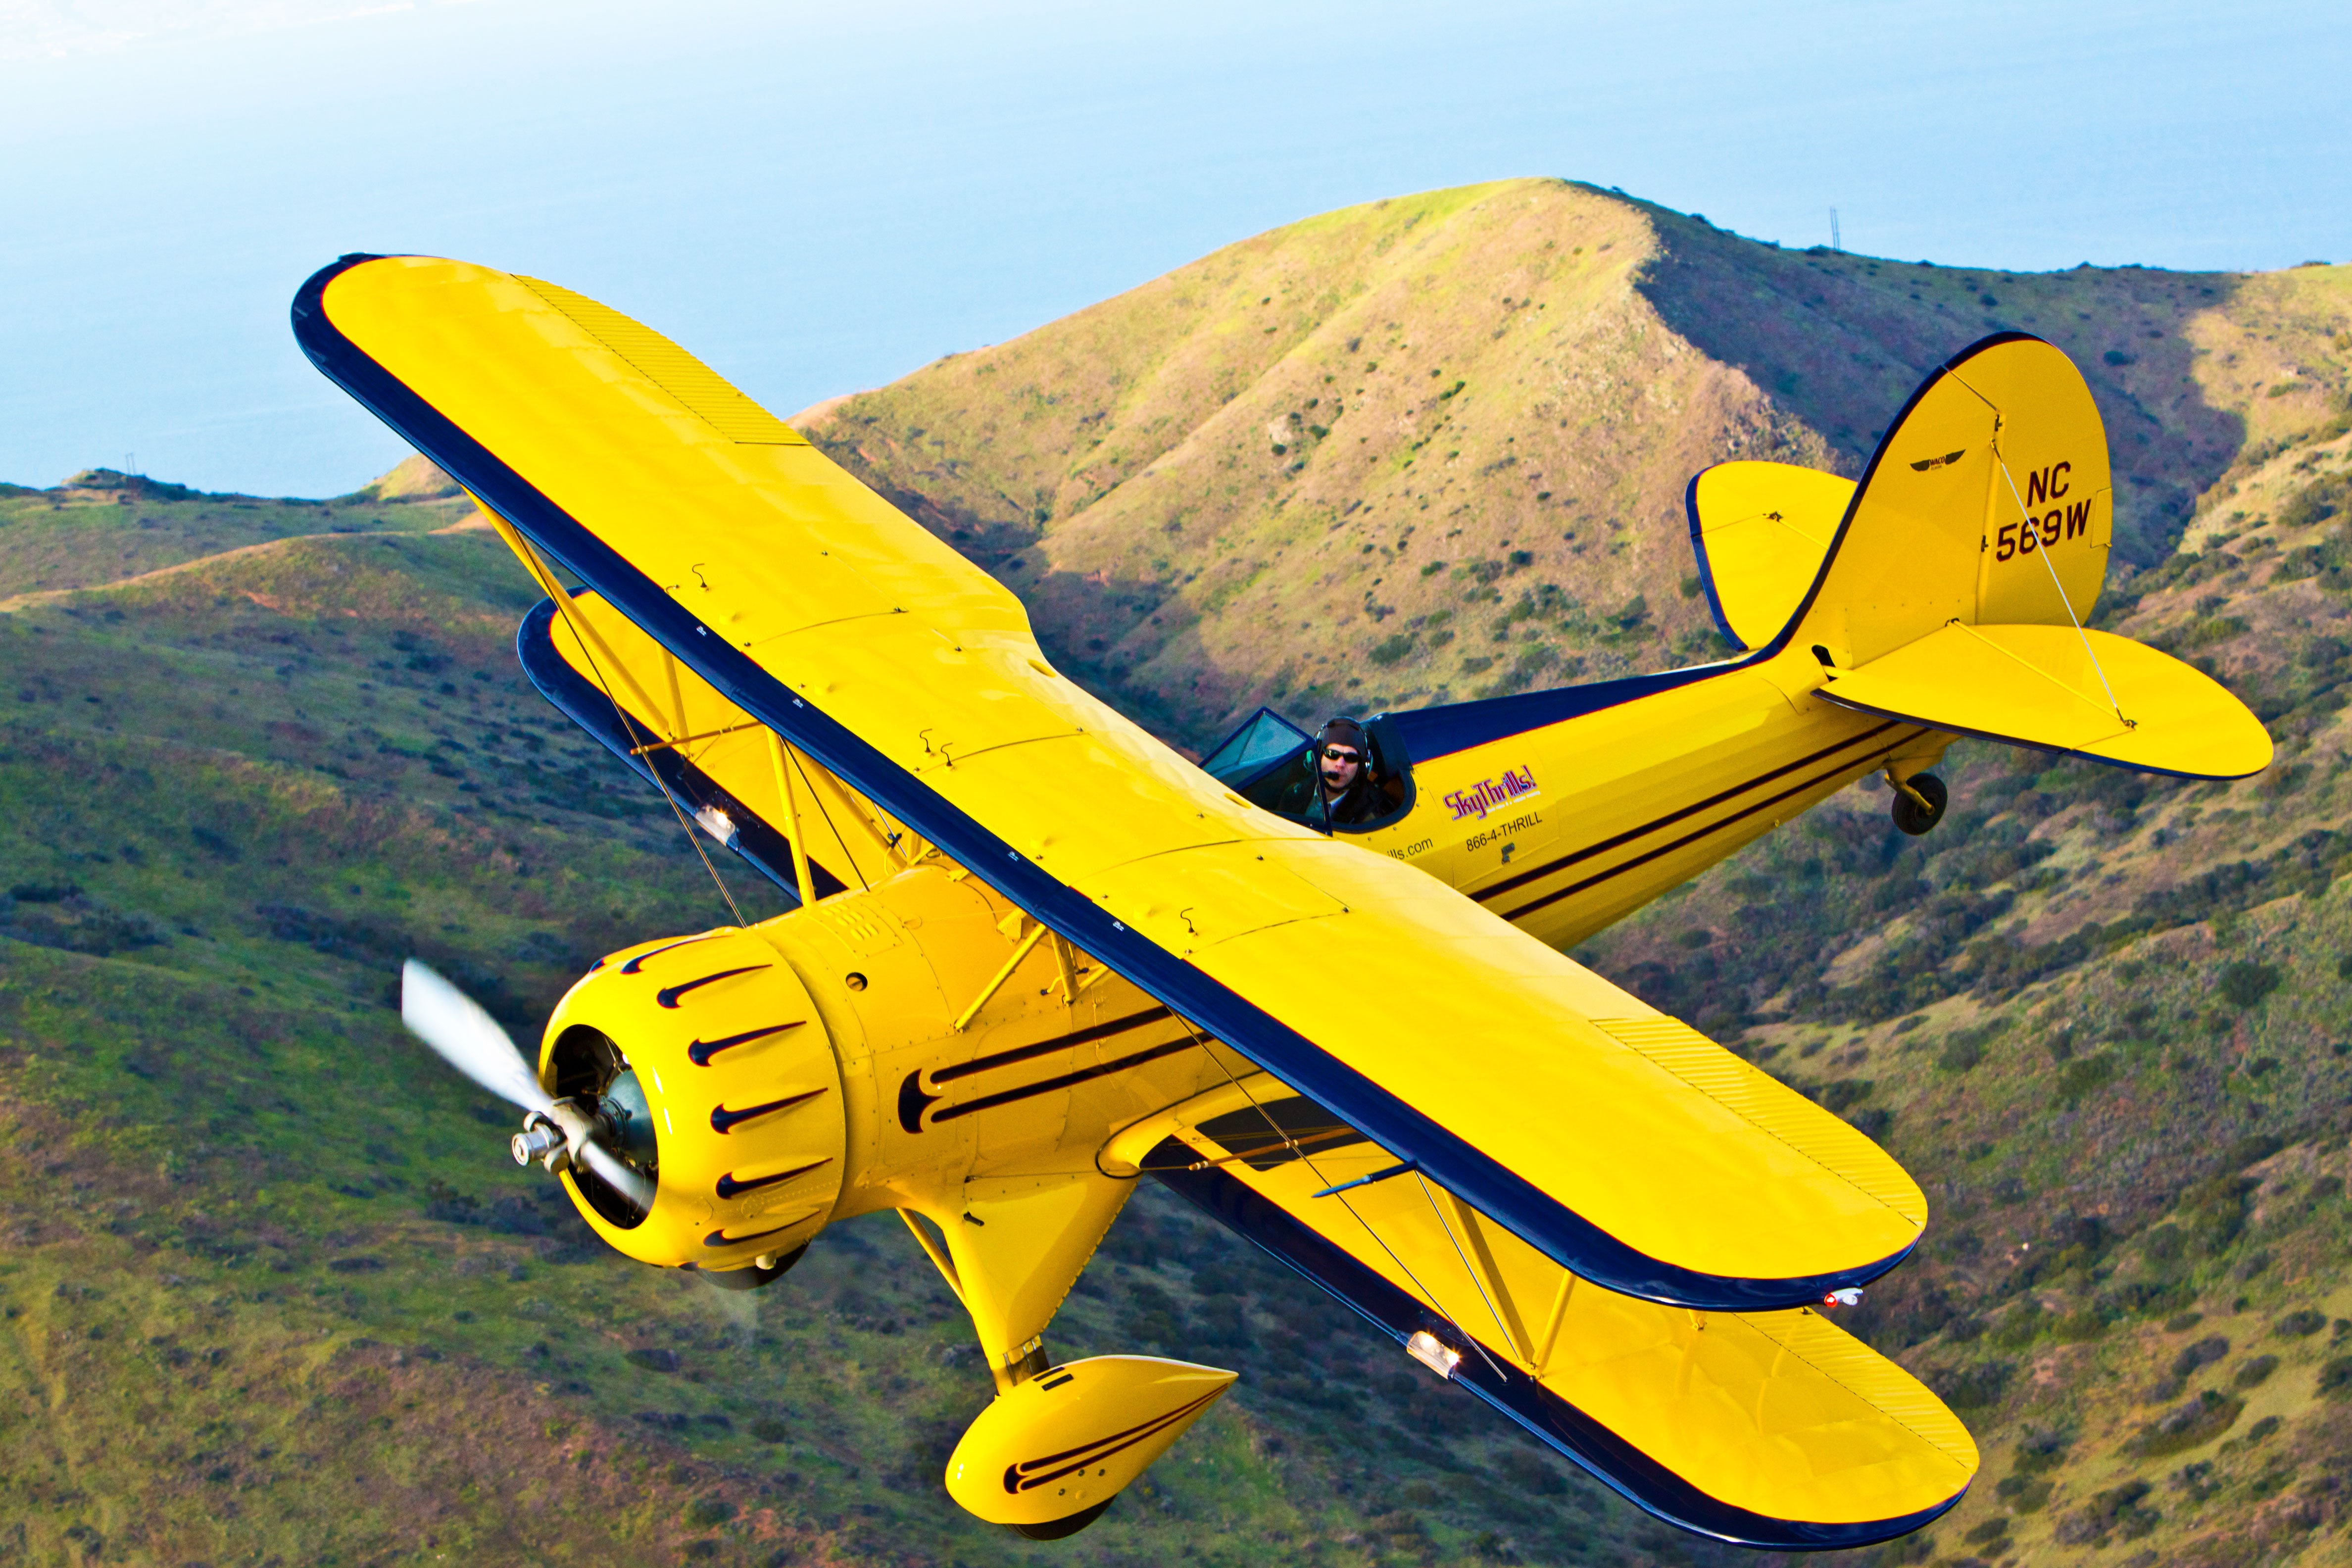 biplane-airplane-plane-aircraft-wallpapers-hd-desktop-and-mobile-backgrounds